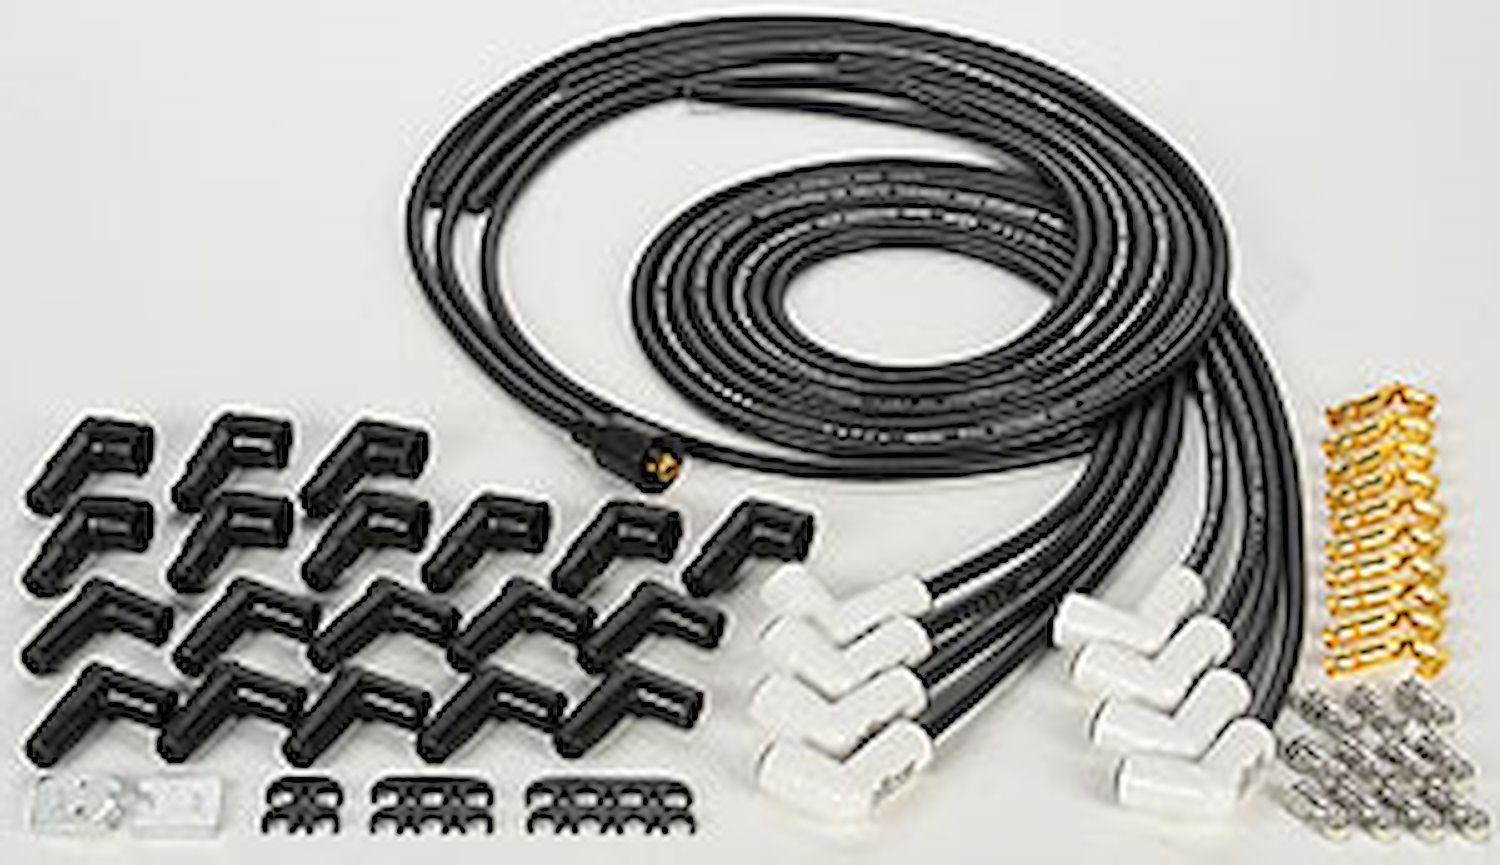 Accel Spark Plug Wire Set - Universal 8mm with Ceramic Boots